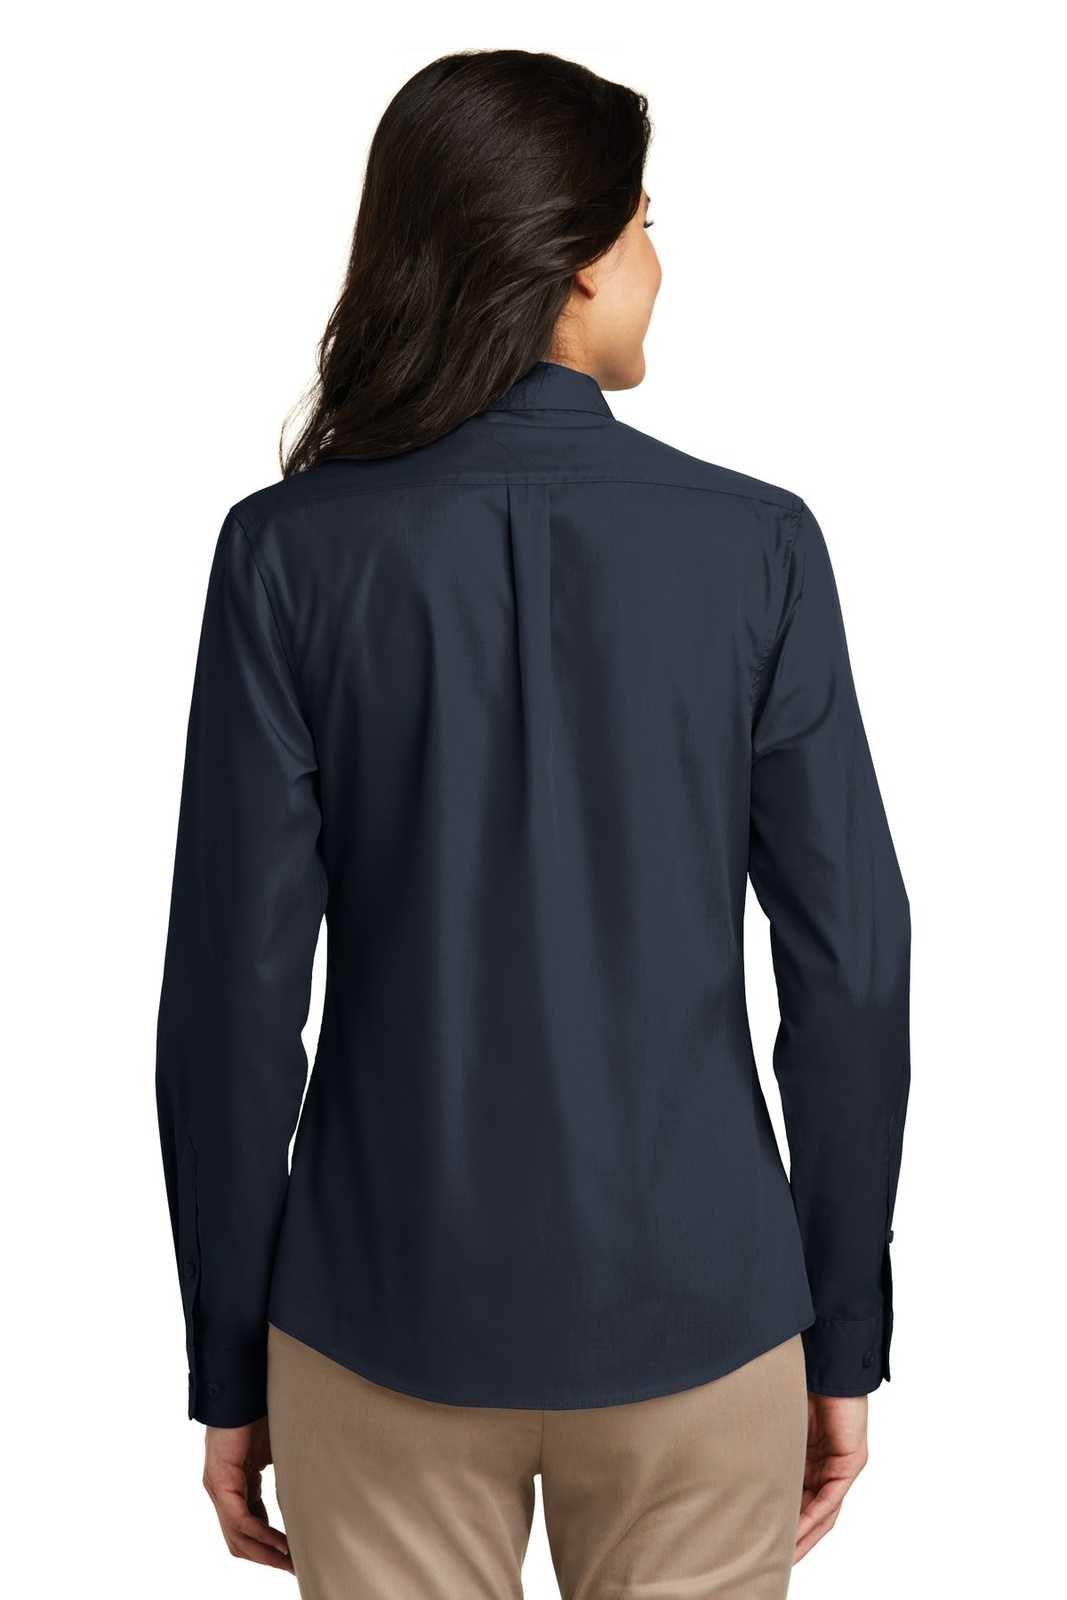 Port Authority LW100 Ladies Long Sleeve Carefree Poplin Shirt - River Blue Navy - HIT a Double - 2